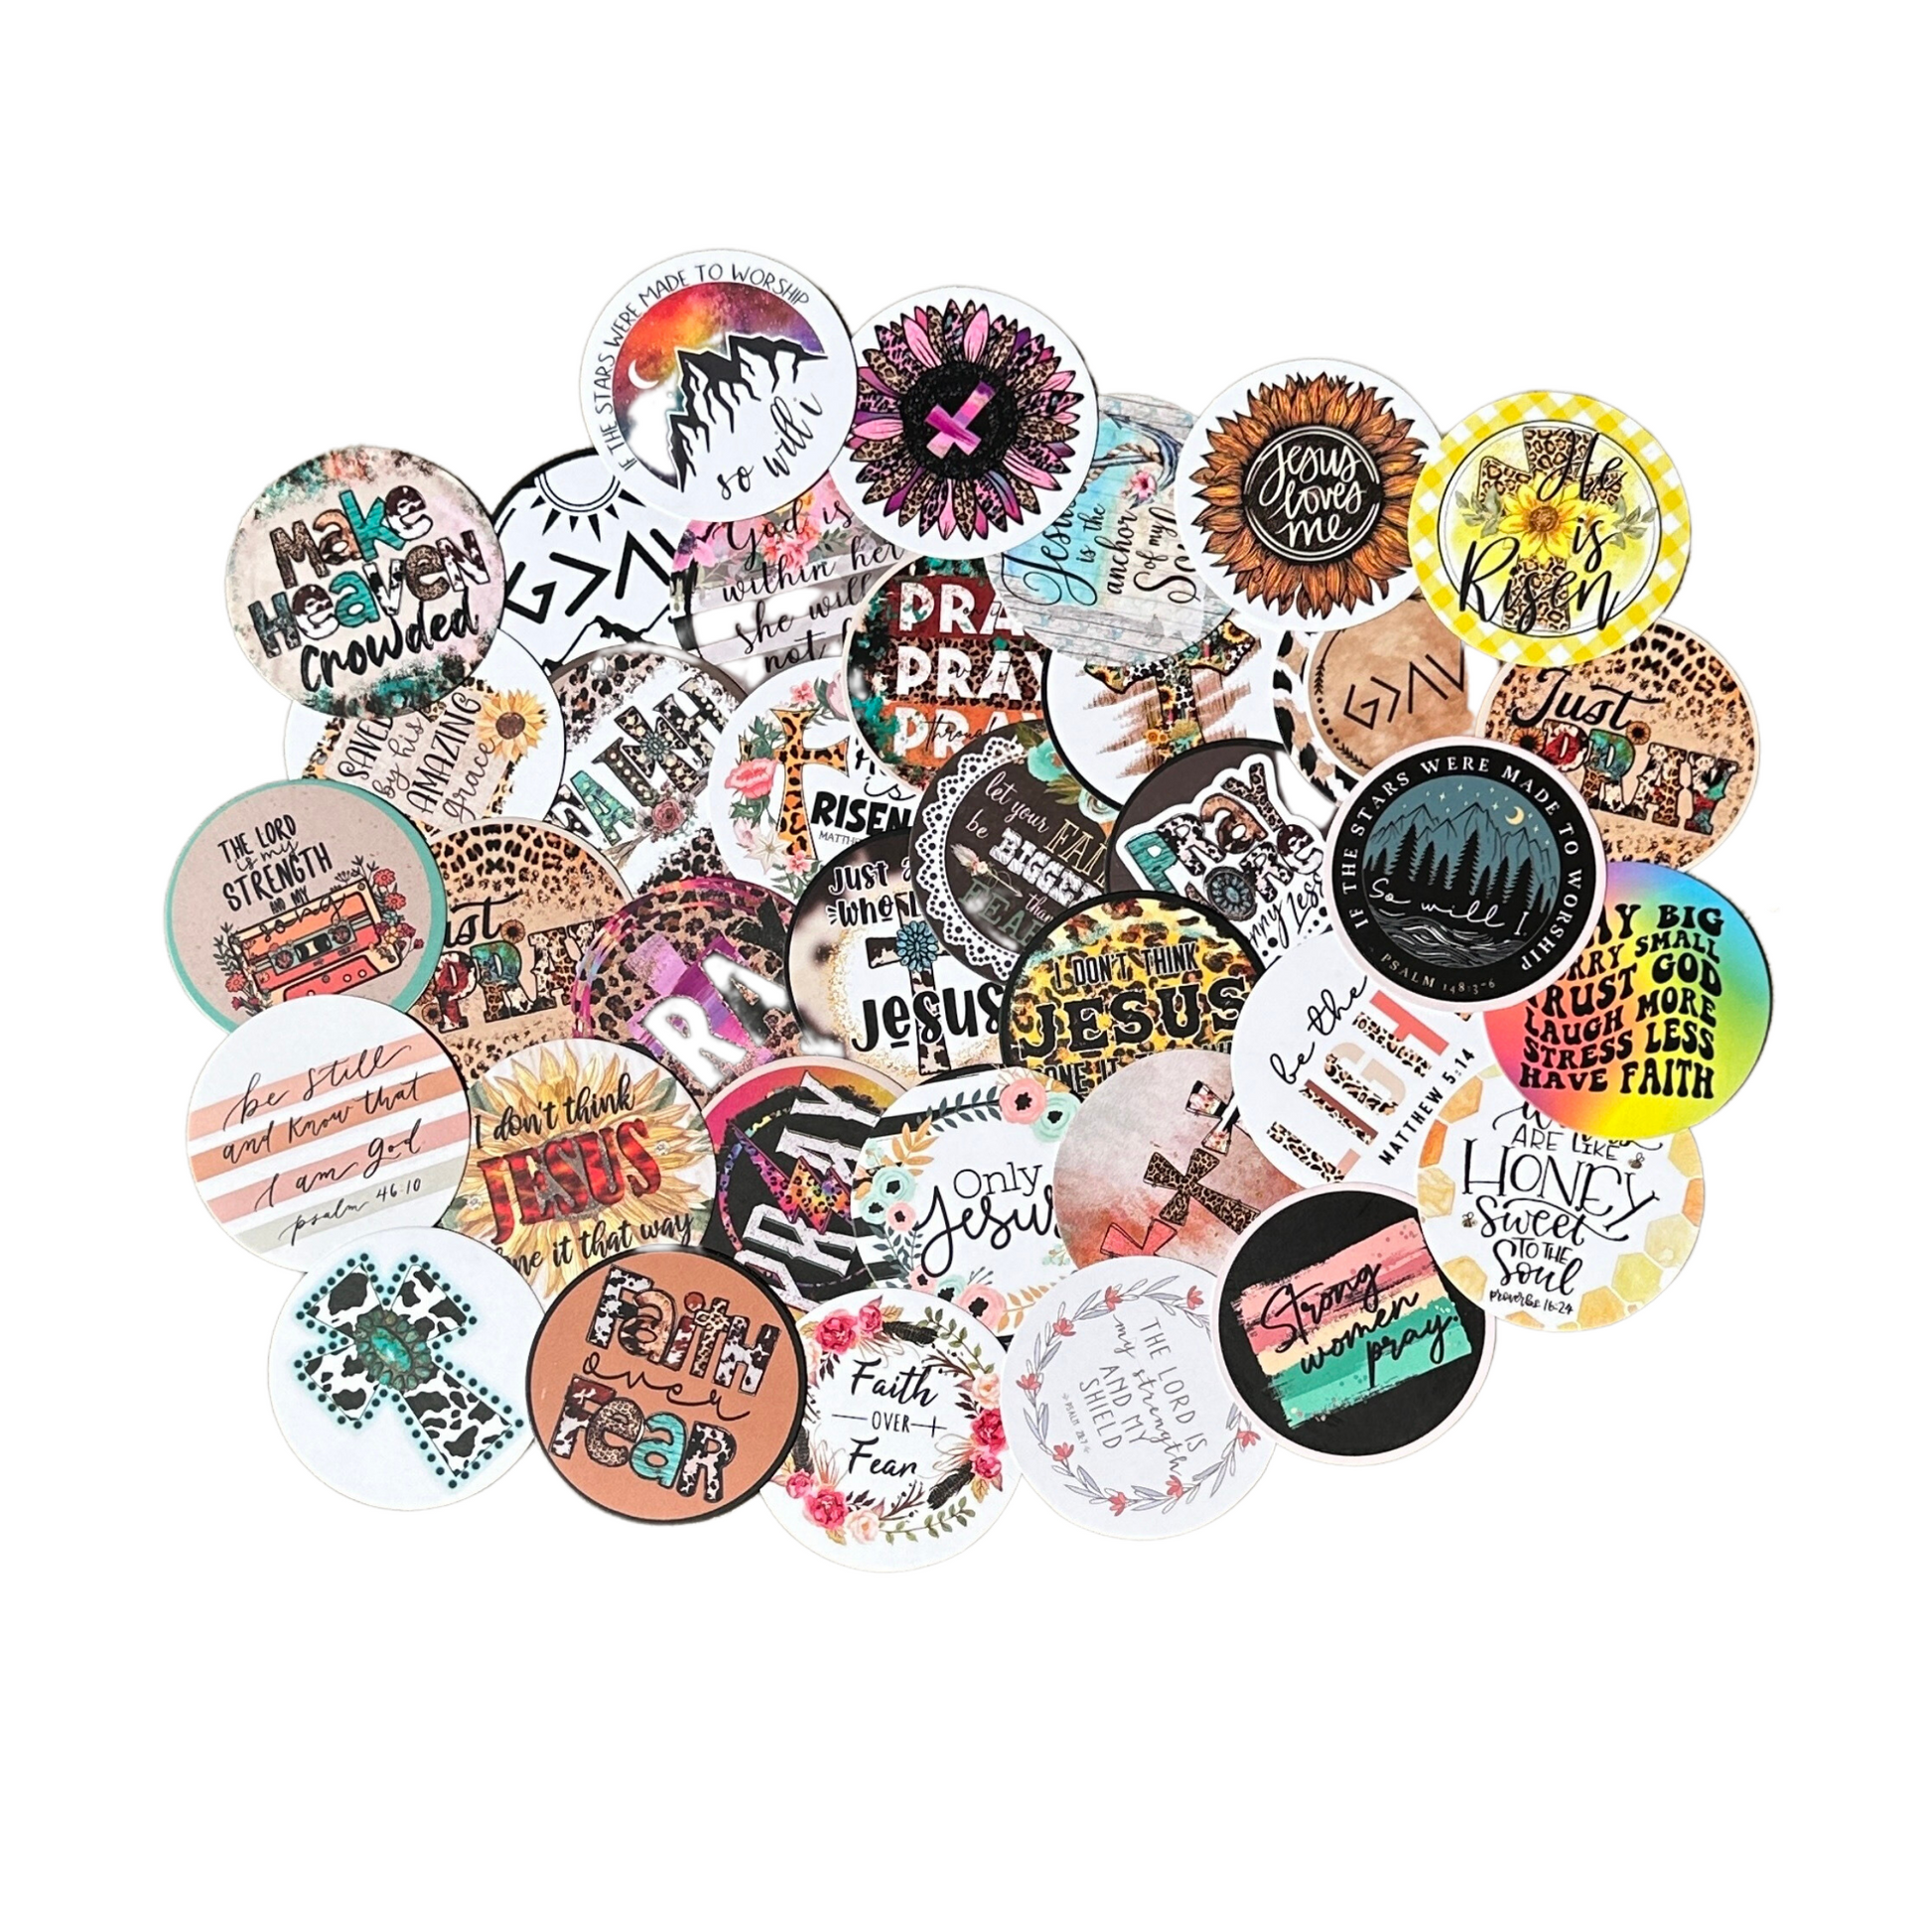 Freshie Cardstock Cutouts Rounds 3 inch for Freshies Random Mix 32